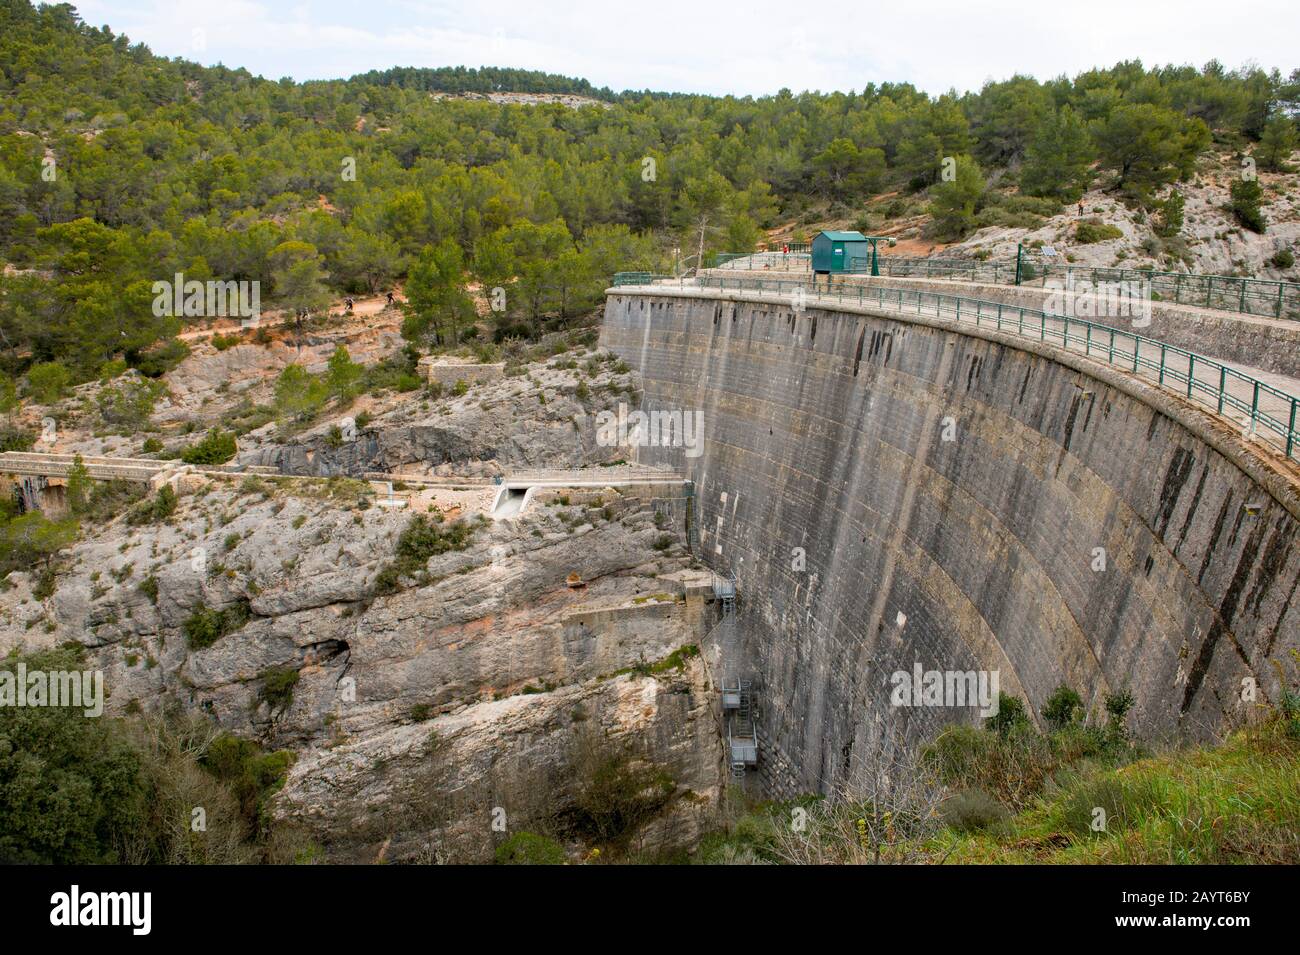 View of the Francois Zola Dam, which is an arch dam, near the village of Le Tholonet, close to Aix-en-Provence, France. Stock Photo